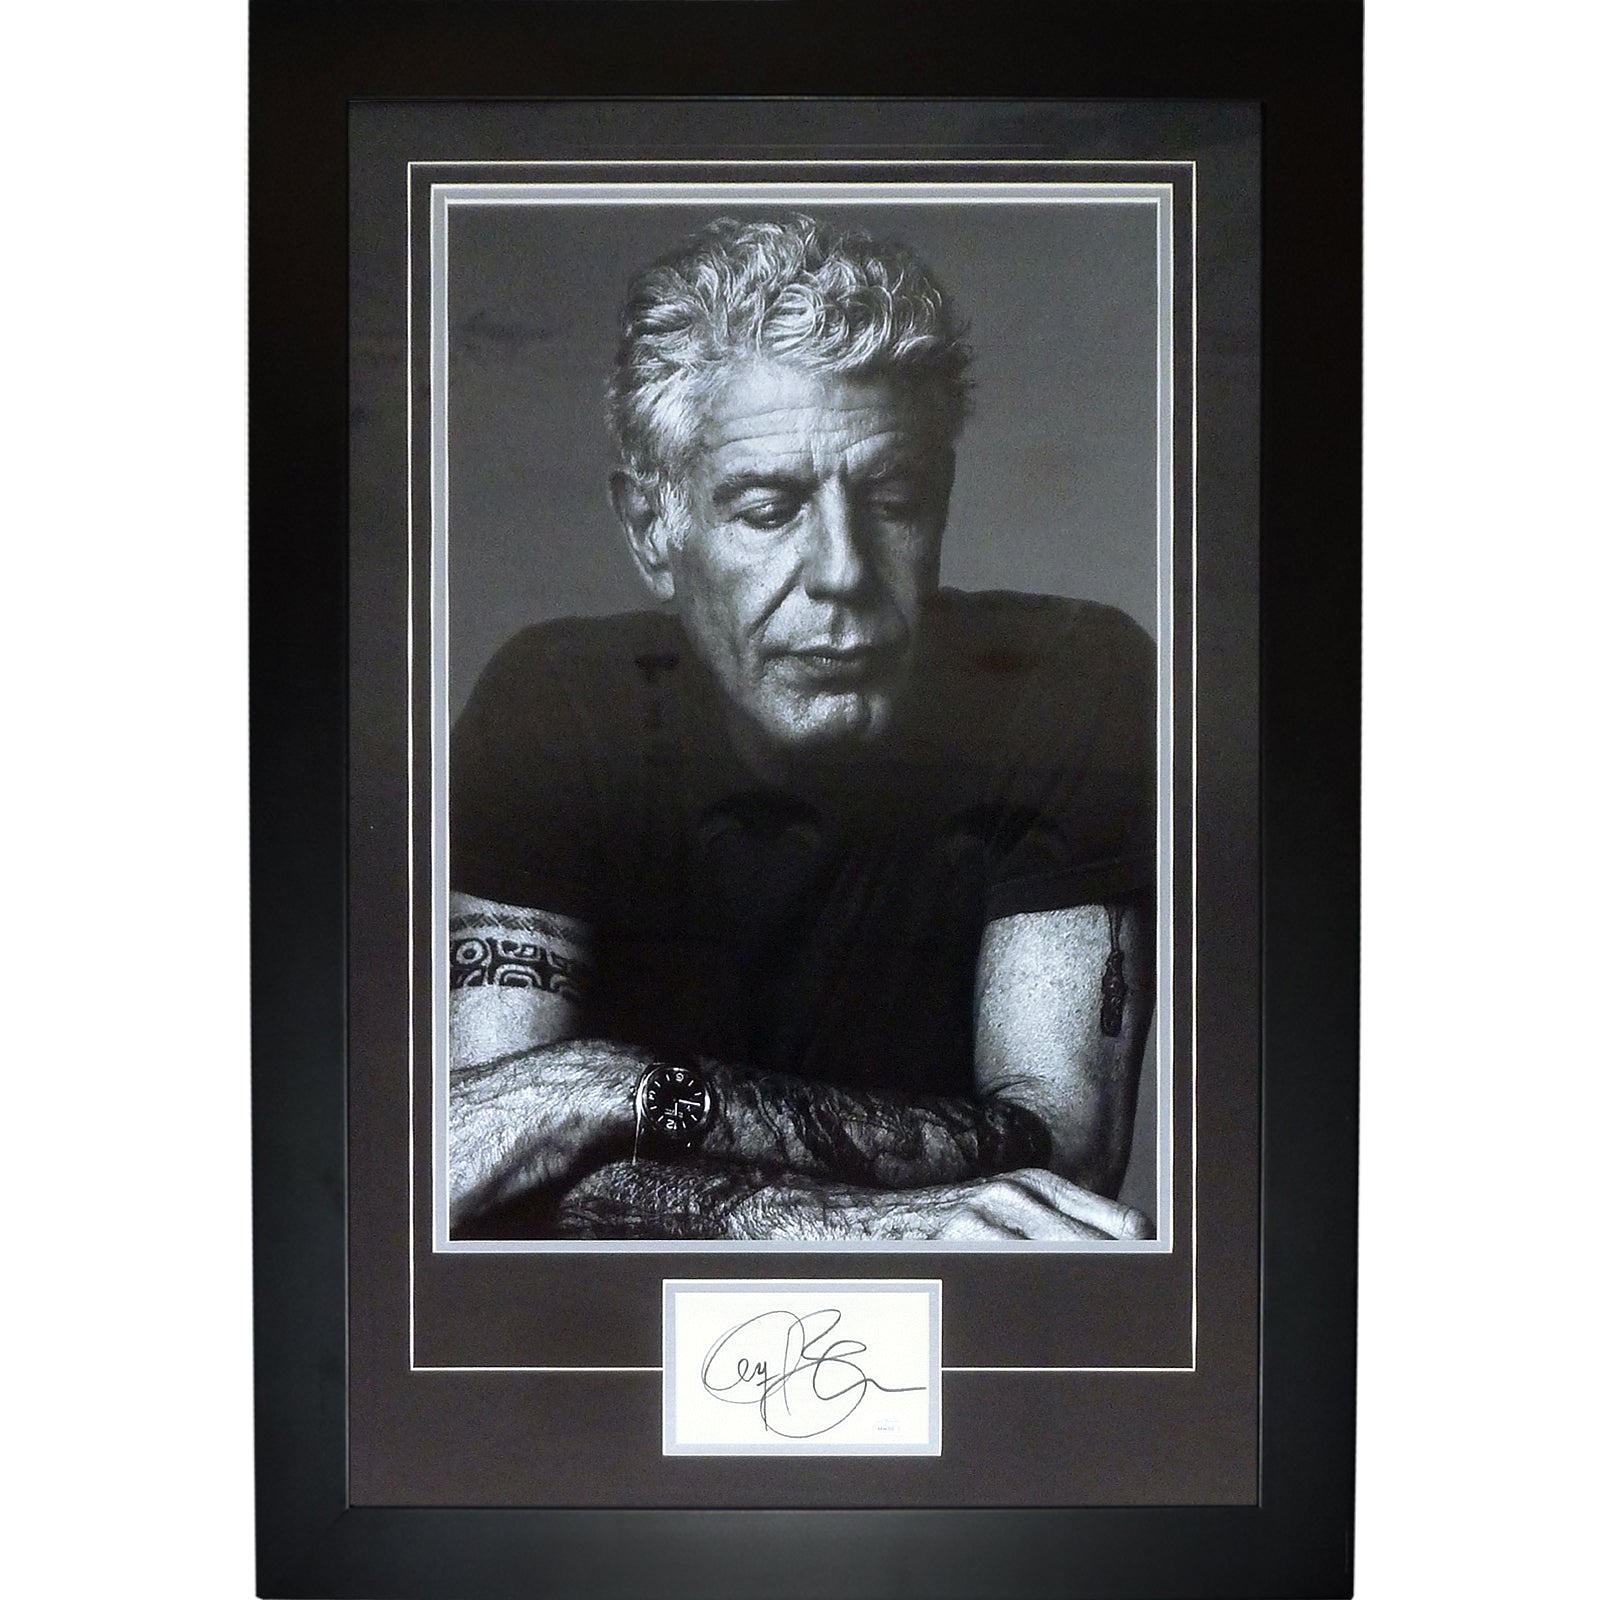 Anthony Bourdain Full-Size Poster Deluxe Framed with Autograph - JSA